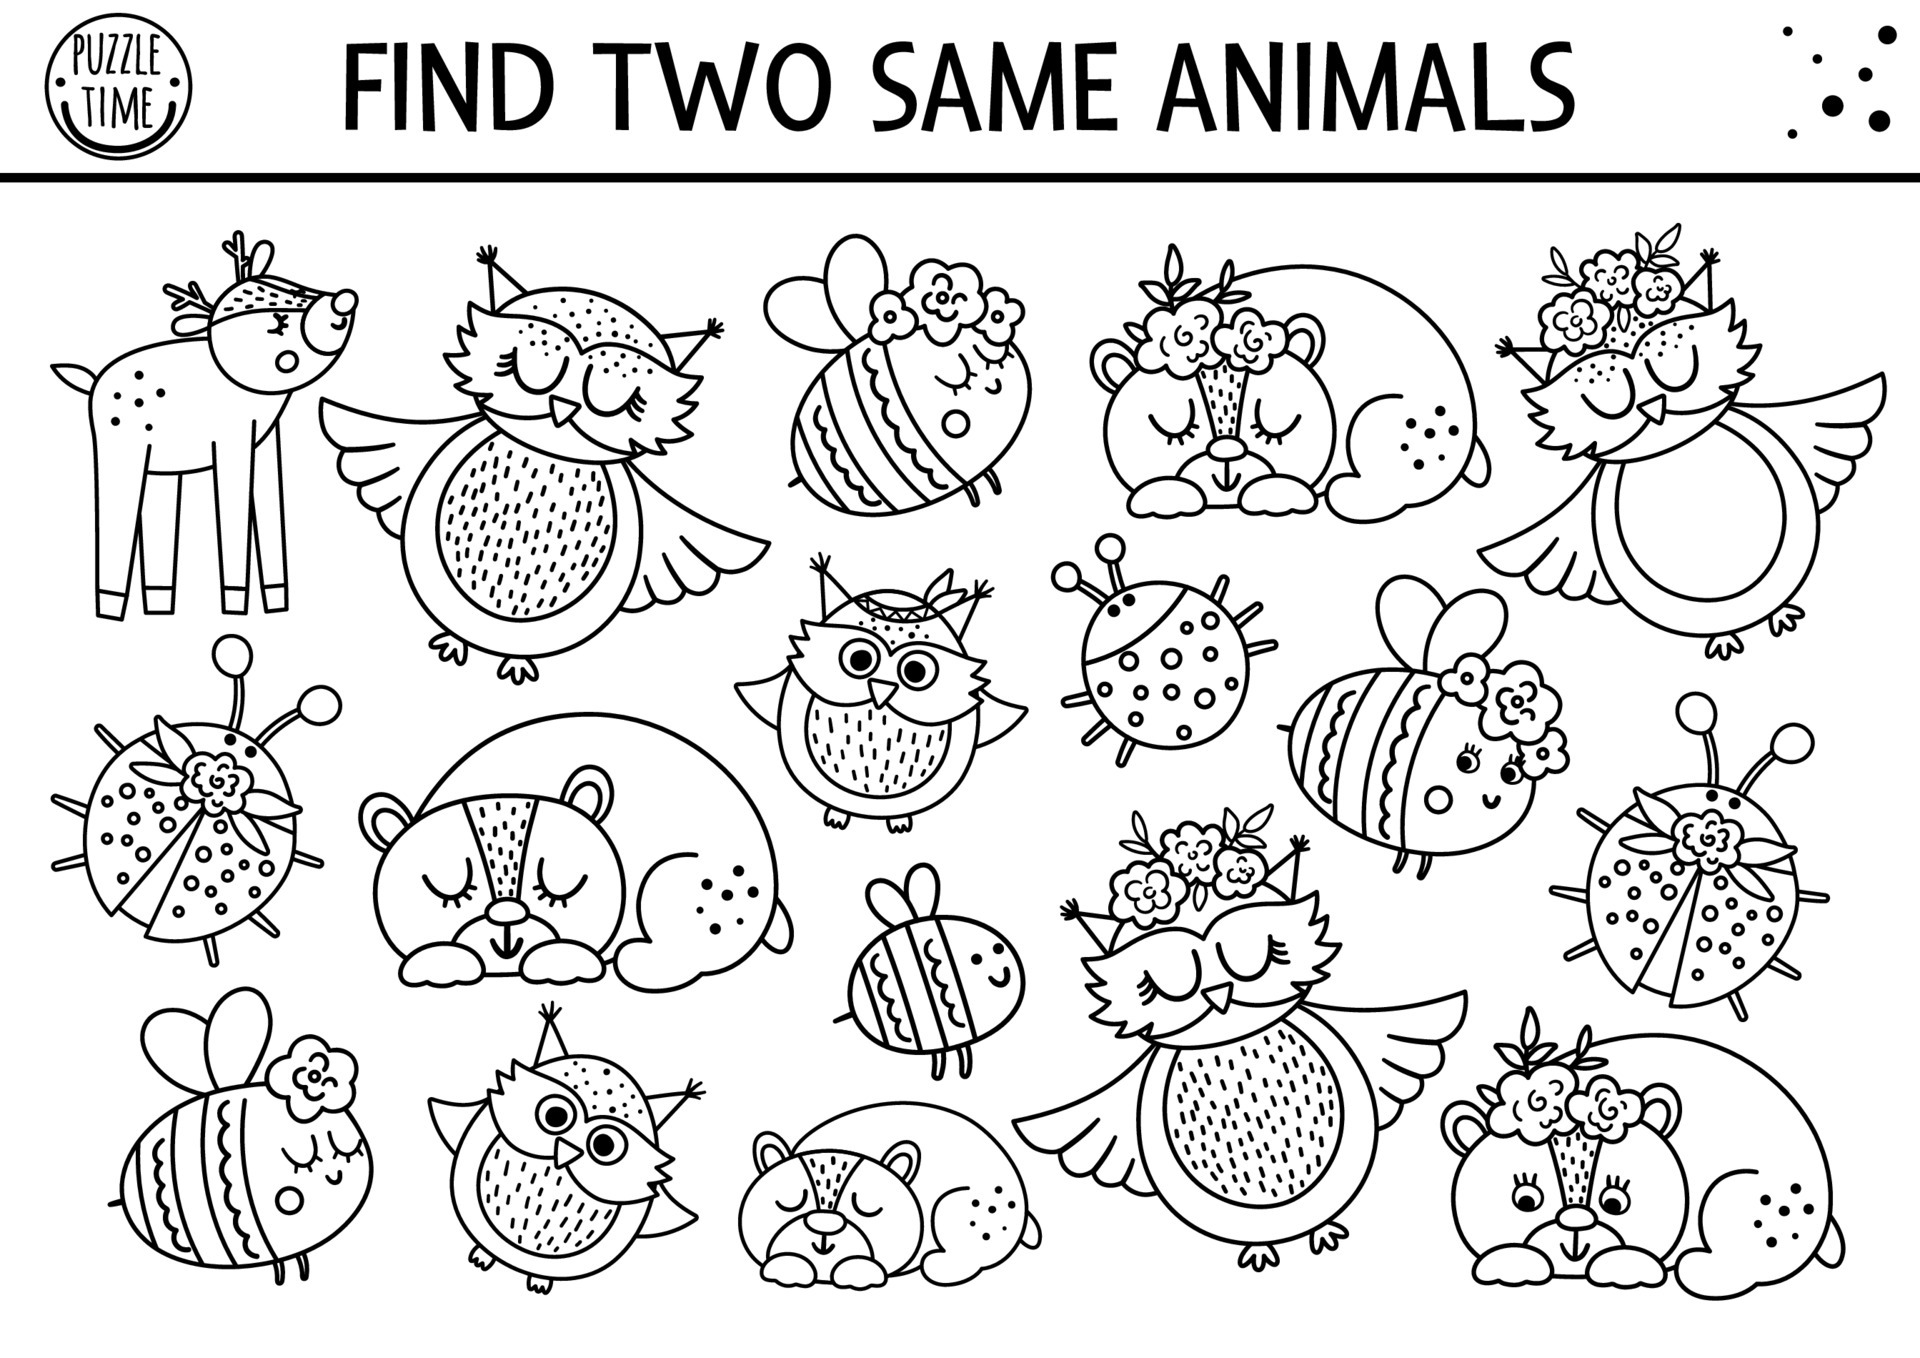 Find two same animals. Mothers day black and white matching activity for  children. Funny spring logical quiz worksheet for kids. Simple printable  line game or coloring page with cute animals 6959696 Vector